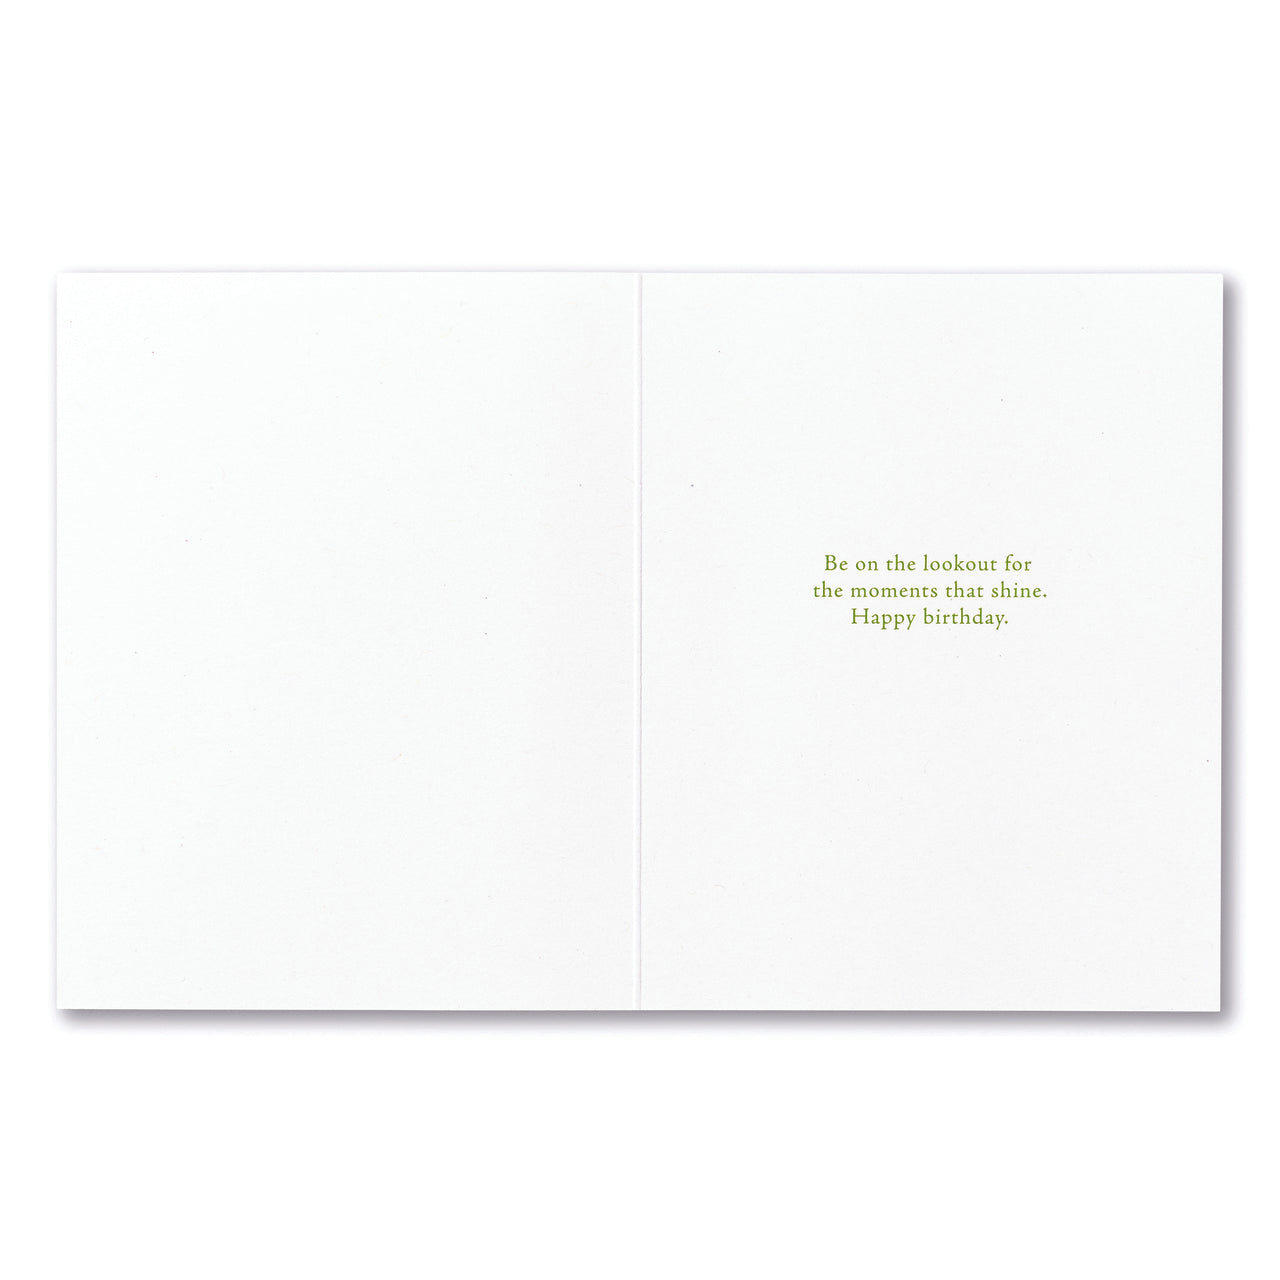 Positively Green Greeting Card - Birthday - We live in a wonderful world that is full of beauty, charm and adventure. There is no end to the adventures that we can have if only we seek them w - Mellow Monkey